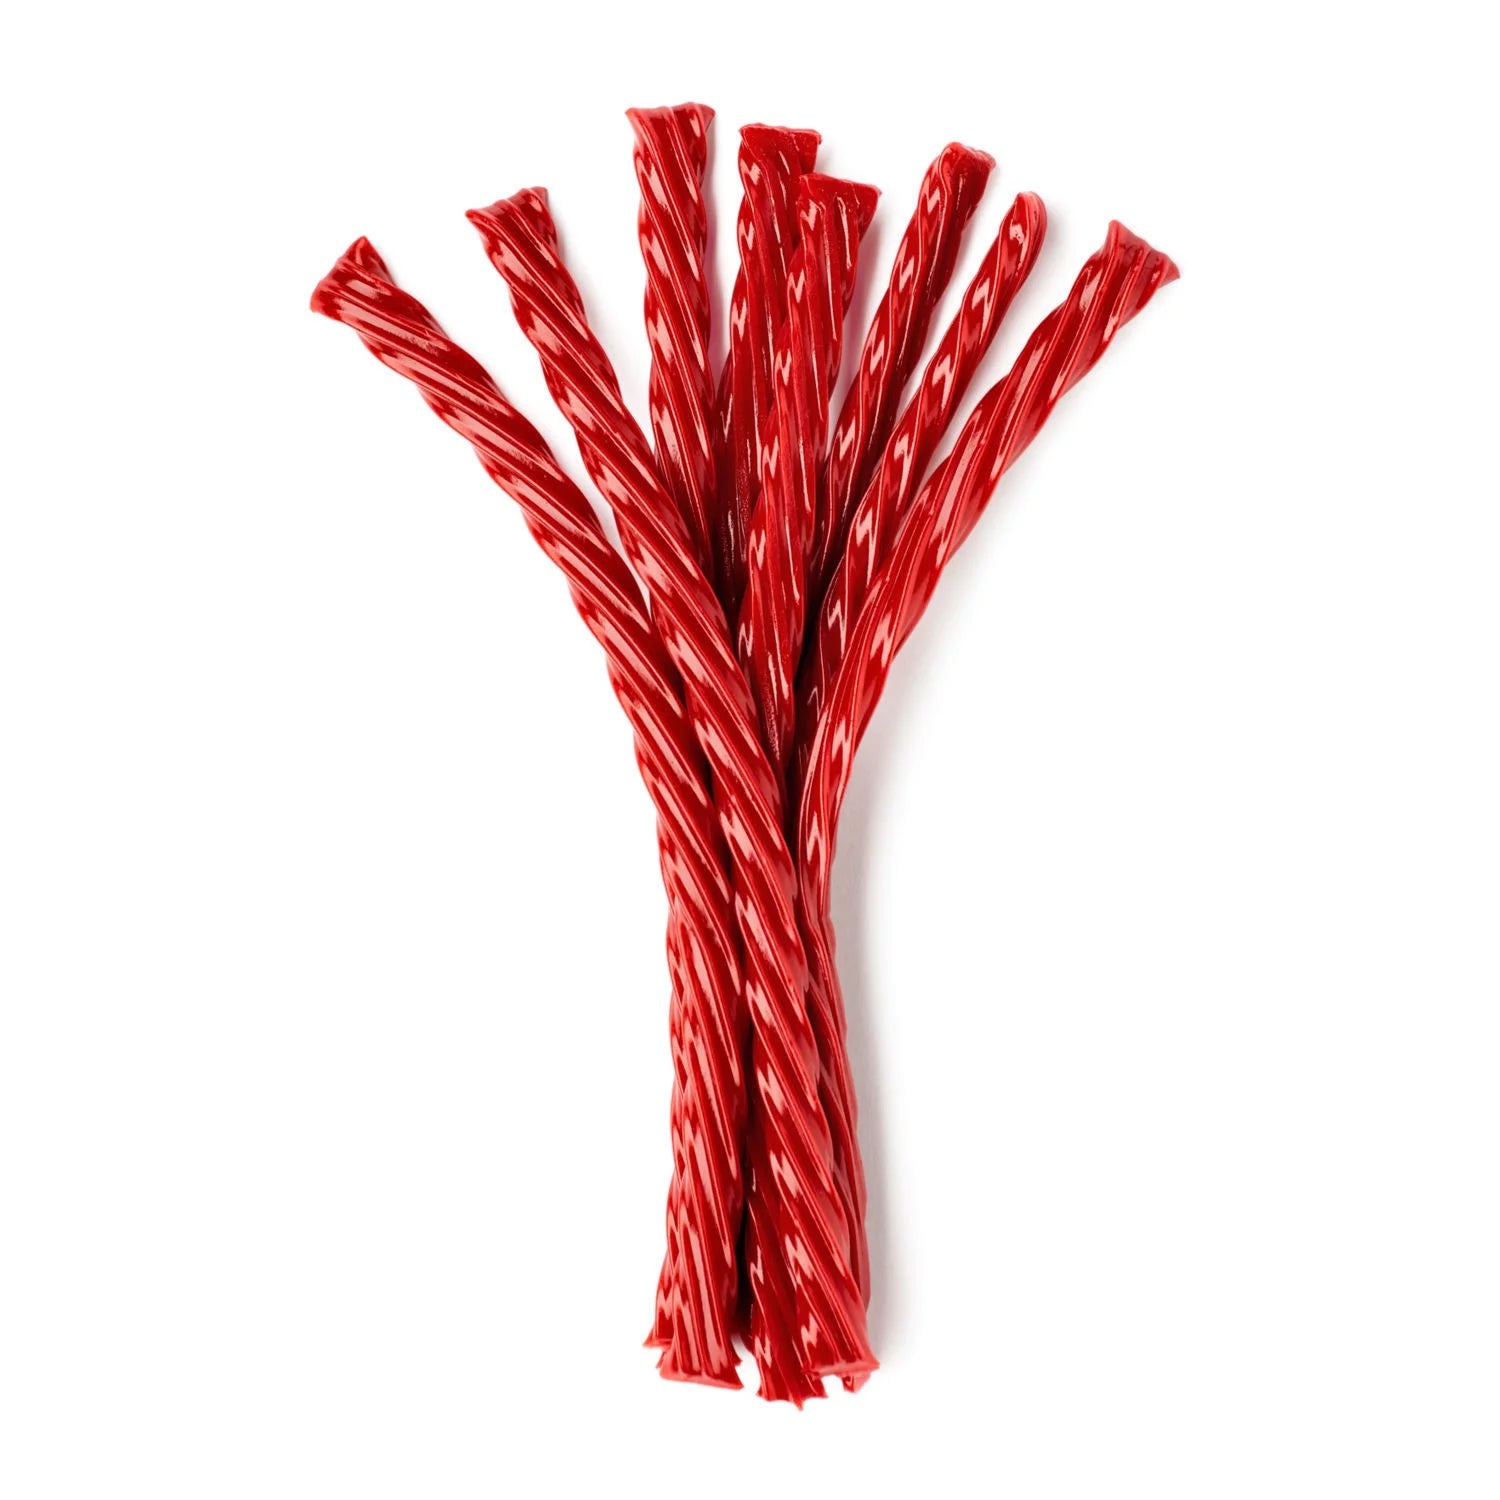 Twists Strawberry Flavored Licorice Style Low Fat Candy, Tub 5 Lb